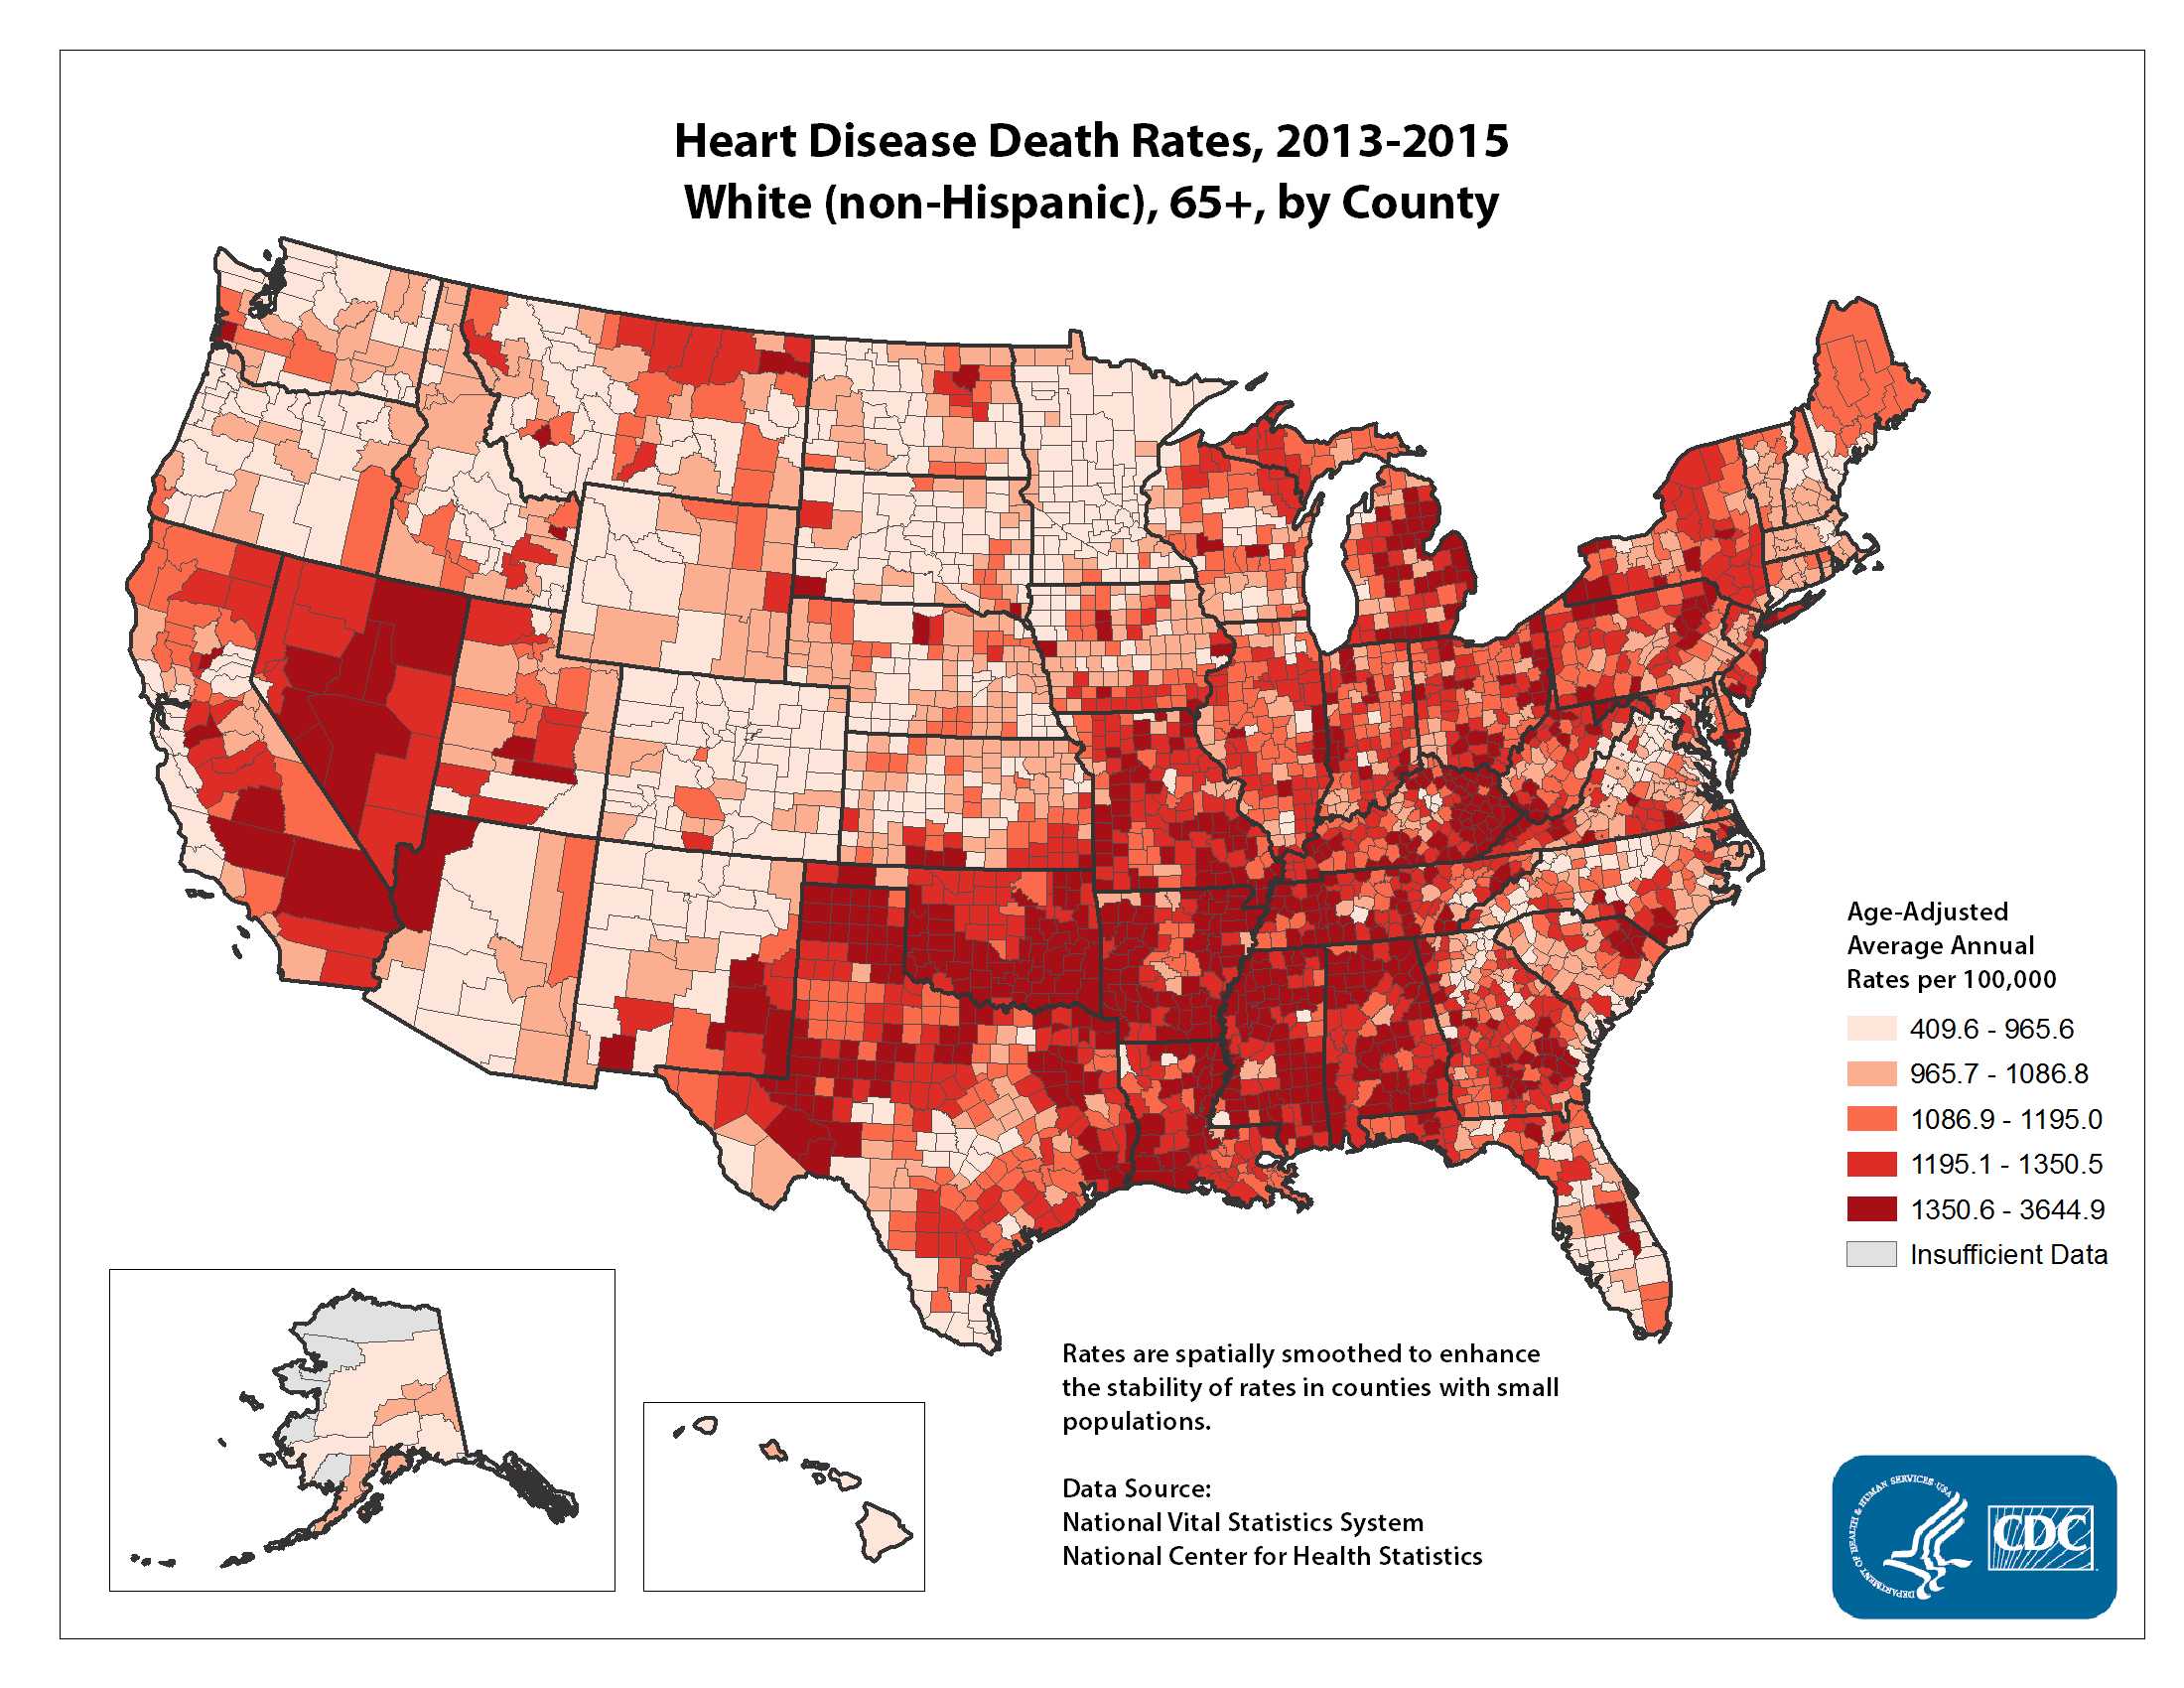 Heart Disease Death Rates for 2012 through 2014 for Whites Aged 65 Years and Older by County. The map shows that concentrations of counties with the highest heart disease death rates - meaning the top quintile - are located primarily in Mississippi, Oklahoma, Arkansas, Louisiana, and Alabama.  Pockets of high-rate counties also were found in Georgia, Kentucky, Tennessee, Missouri, Michigan, Nevada, Texas, and California.